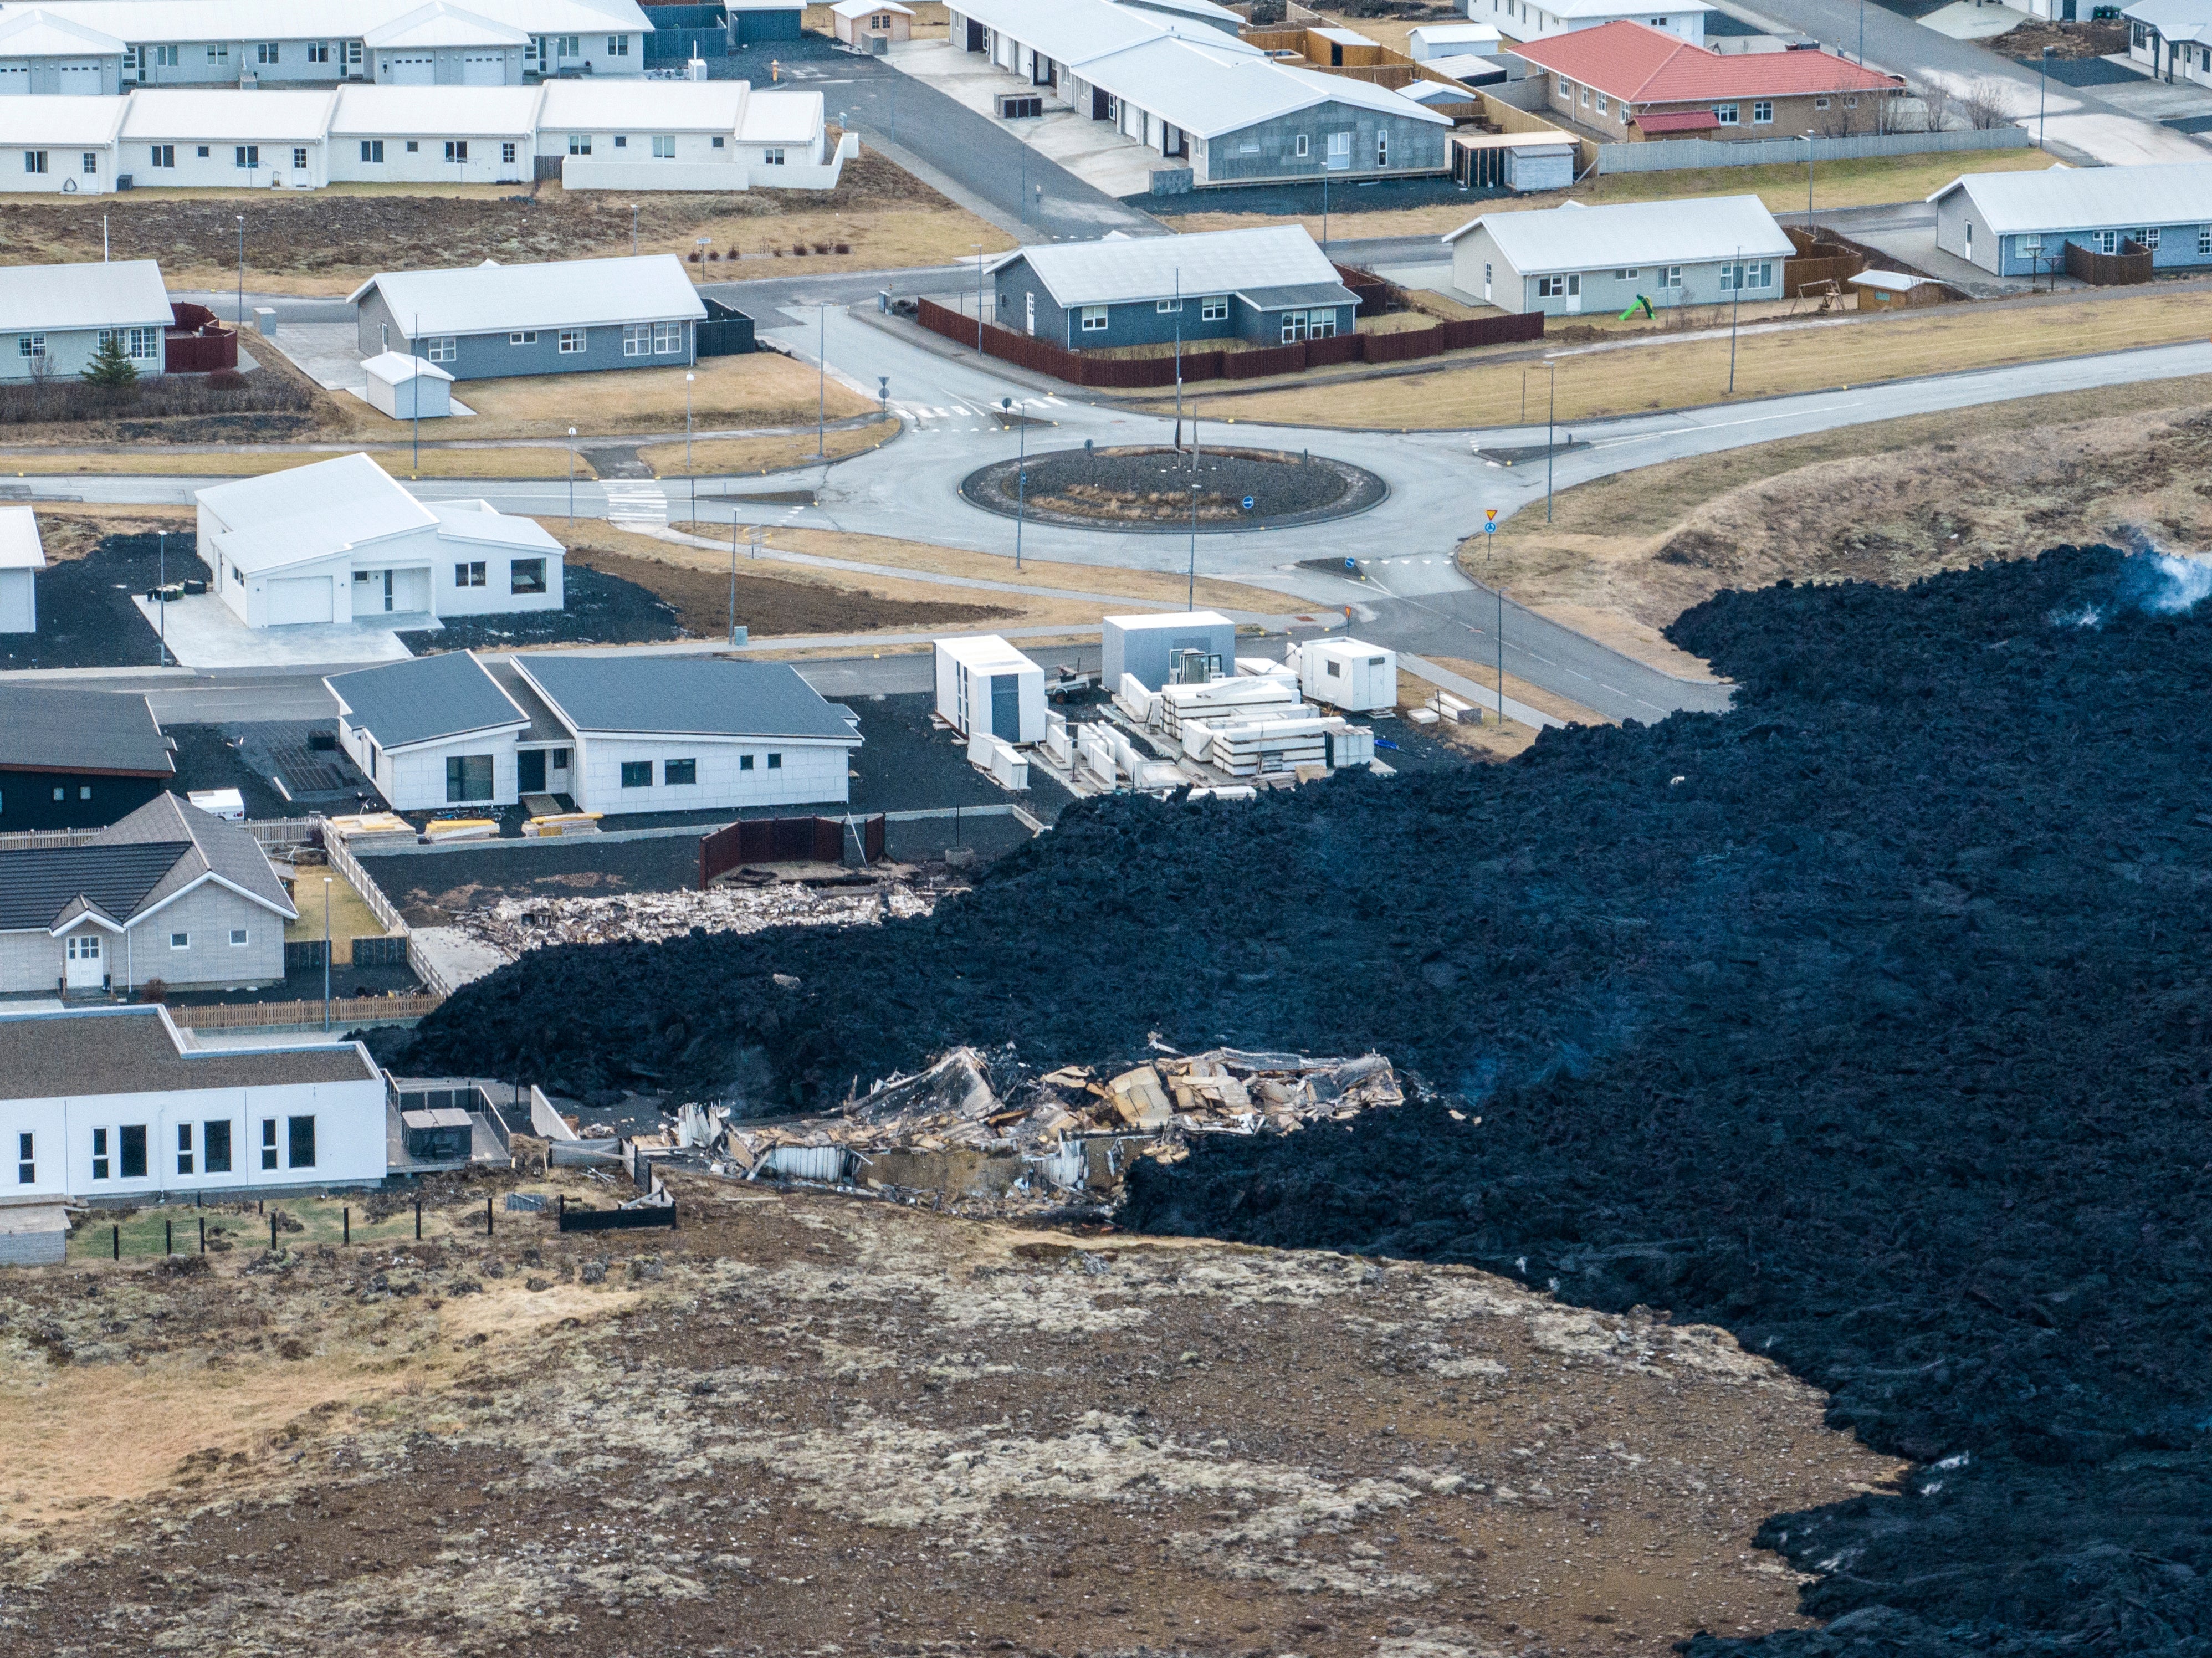 An areal view showing the damage of the lava flow in the town of Grindavik